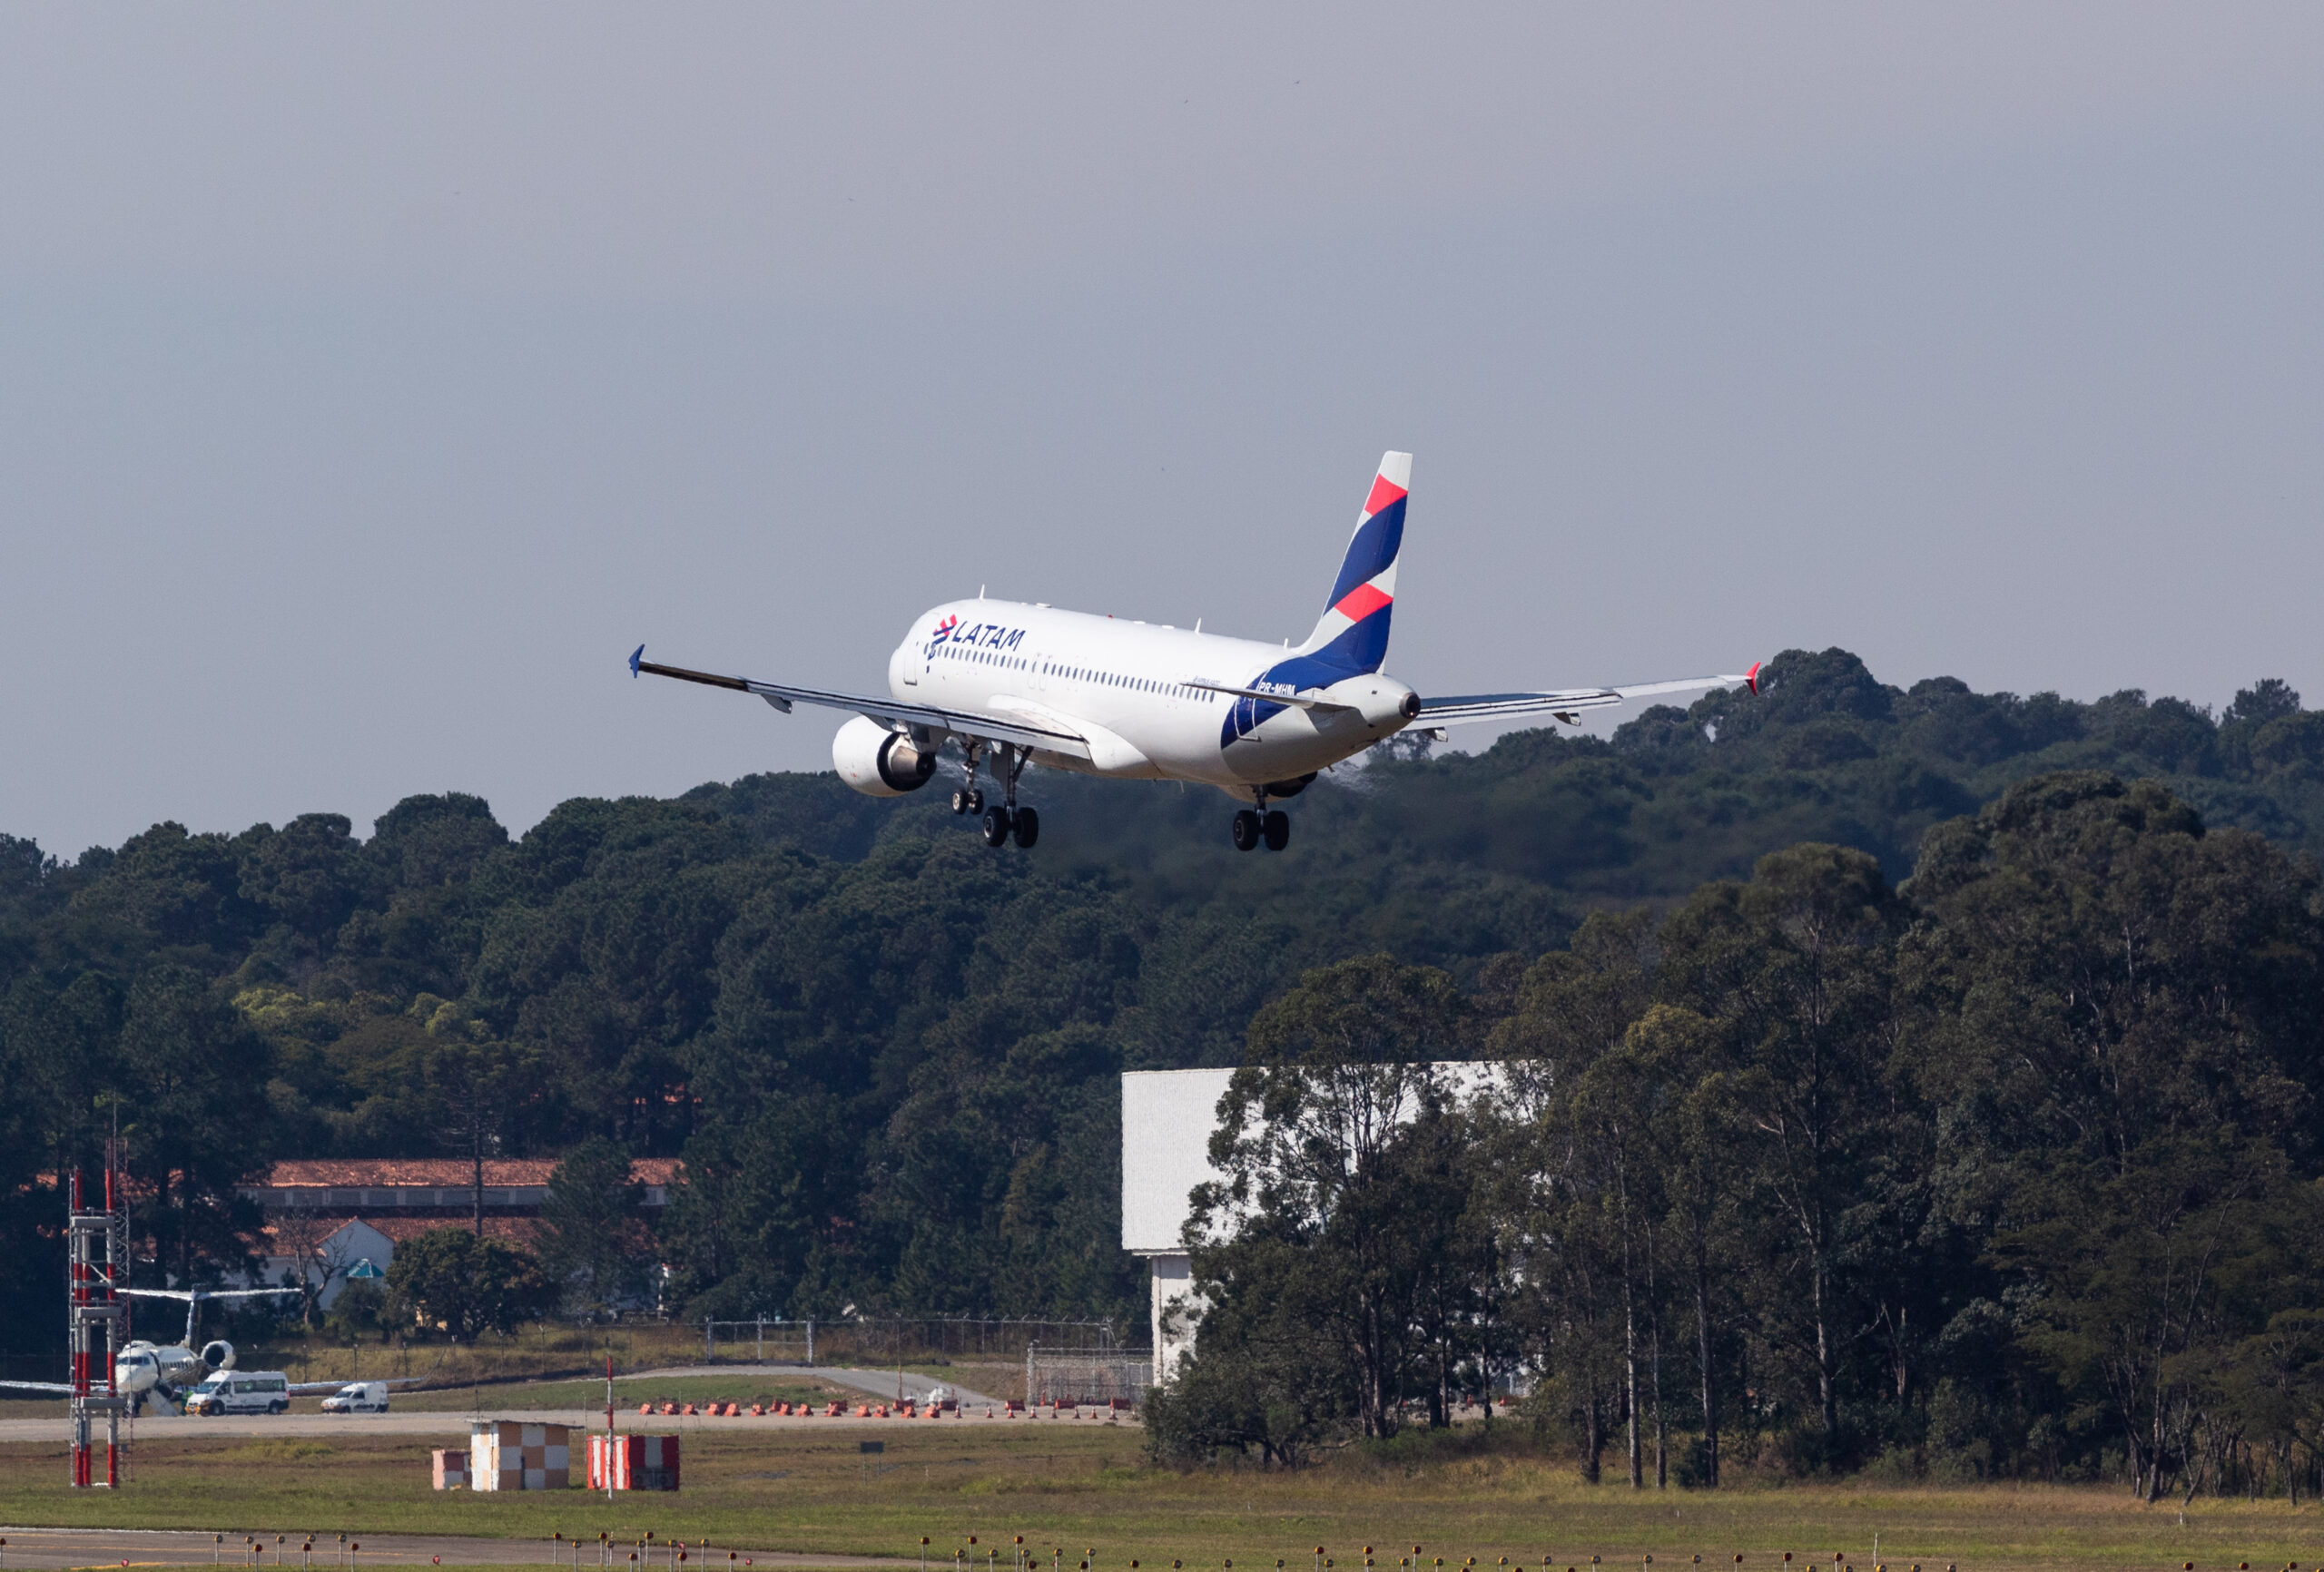 PR-MHM - Airbus A320-214 - LATAM Airlines - Blog do Spotter